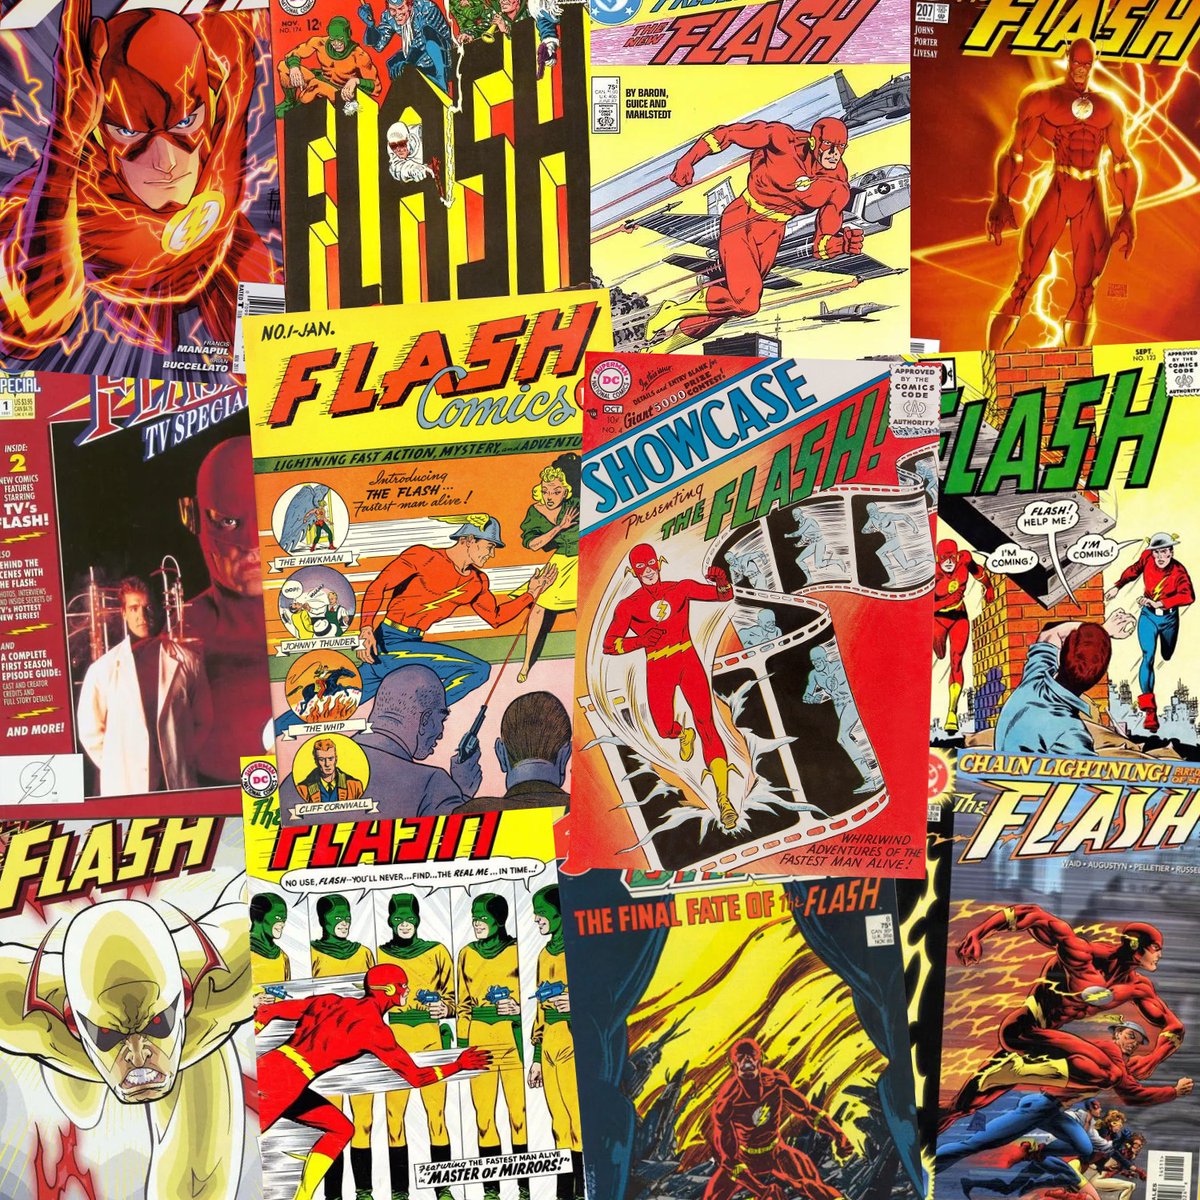 What was the 1st comic you bought featuring @theFlash? A copy bought at a local newsstand back in the day? A cover that caught your eye? Share below! ⚡️⚡️⚡️ #TheFlash #Flash #CrisisOnInfiniteEarths #JayGarrick #BarryAllen #WallyWest #comics #collector